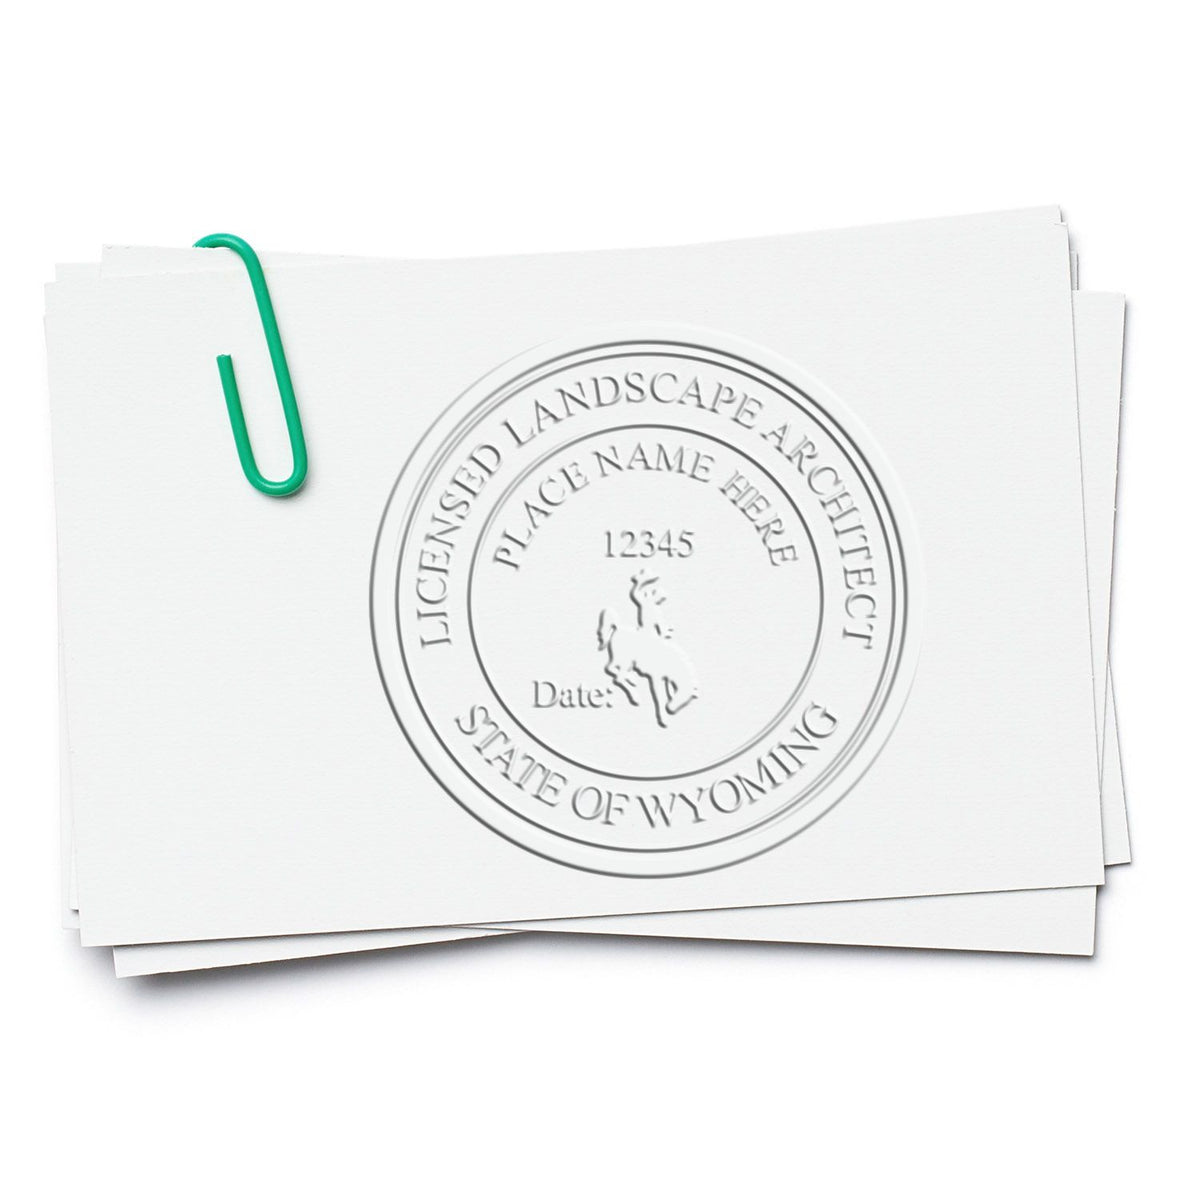 A lifestyle photo showing a stamped image of the Soft Pocket Wyoming Landscape Architect Embosser on a piece of paper